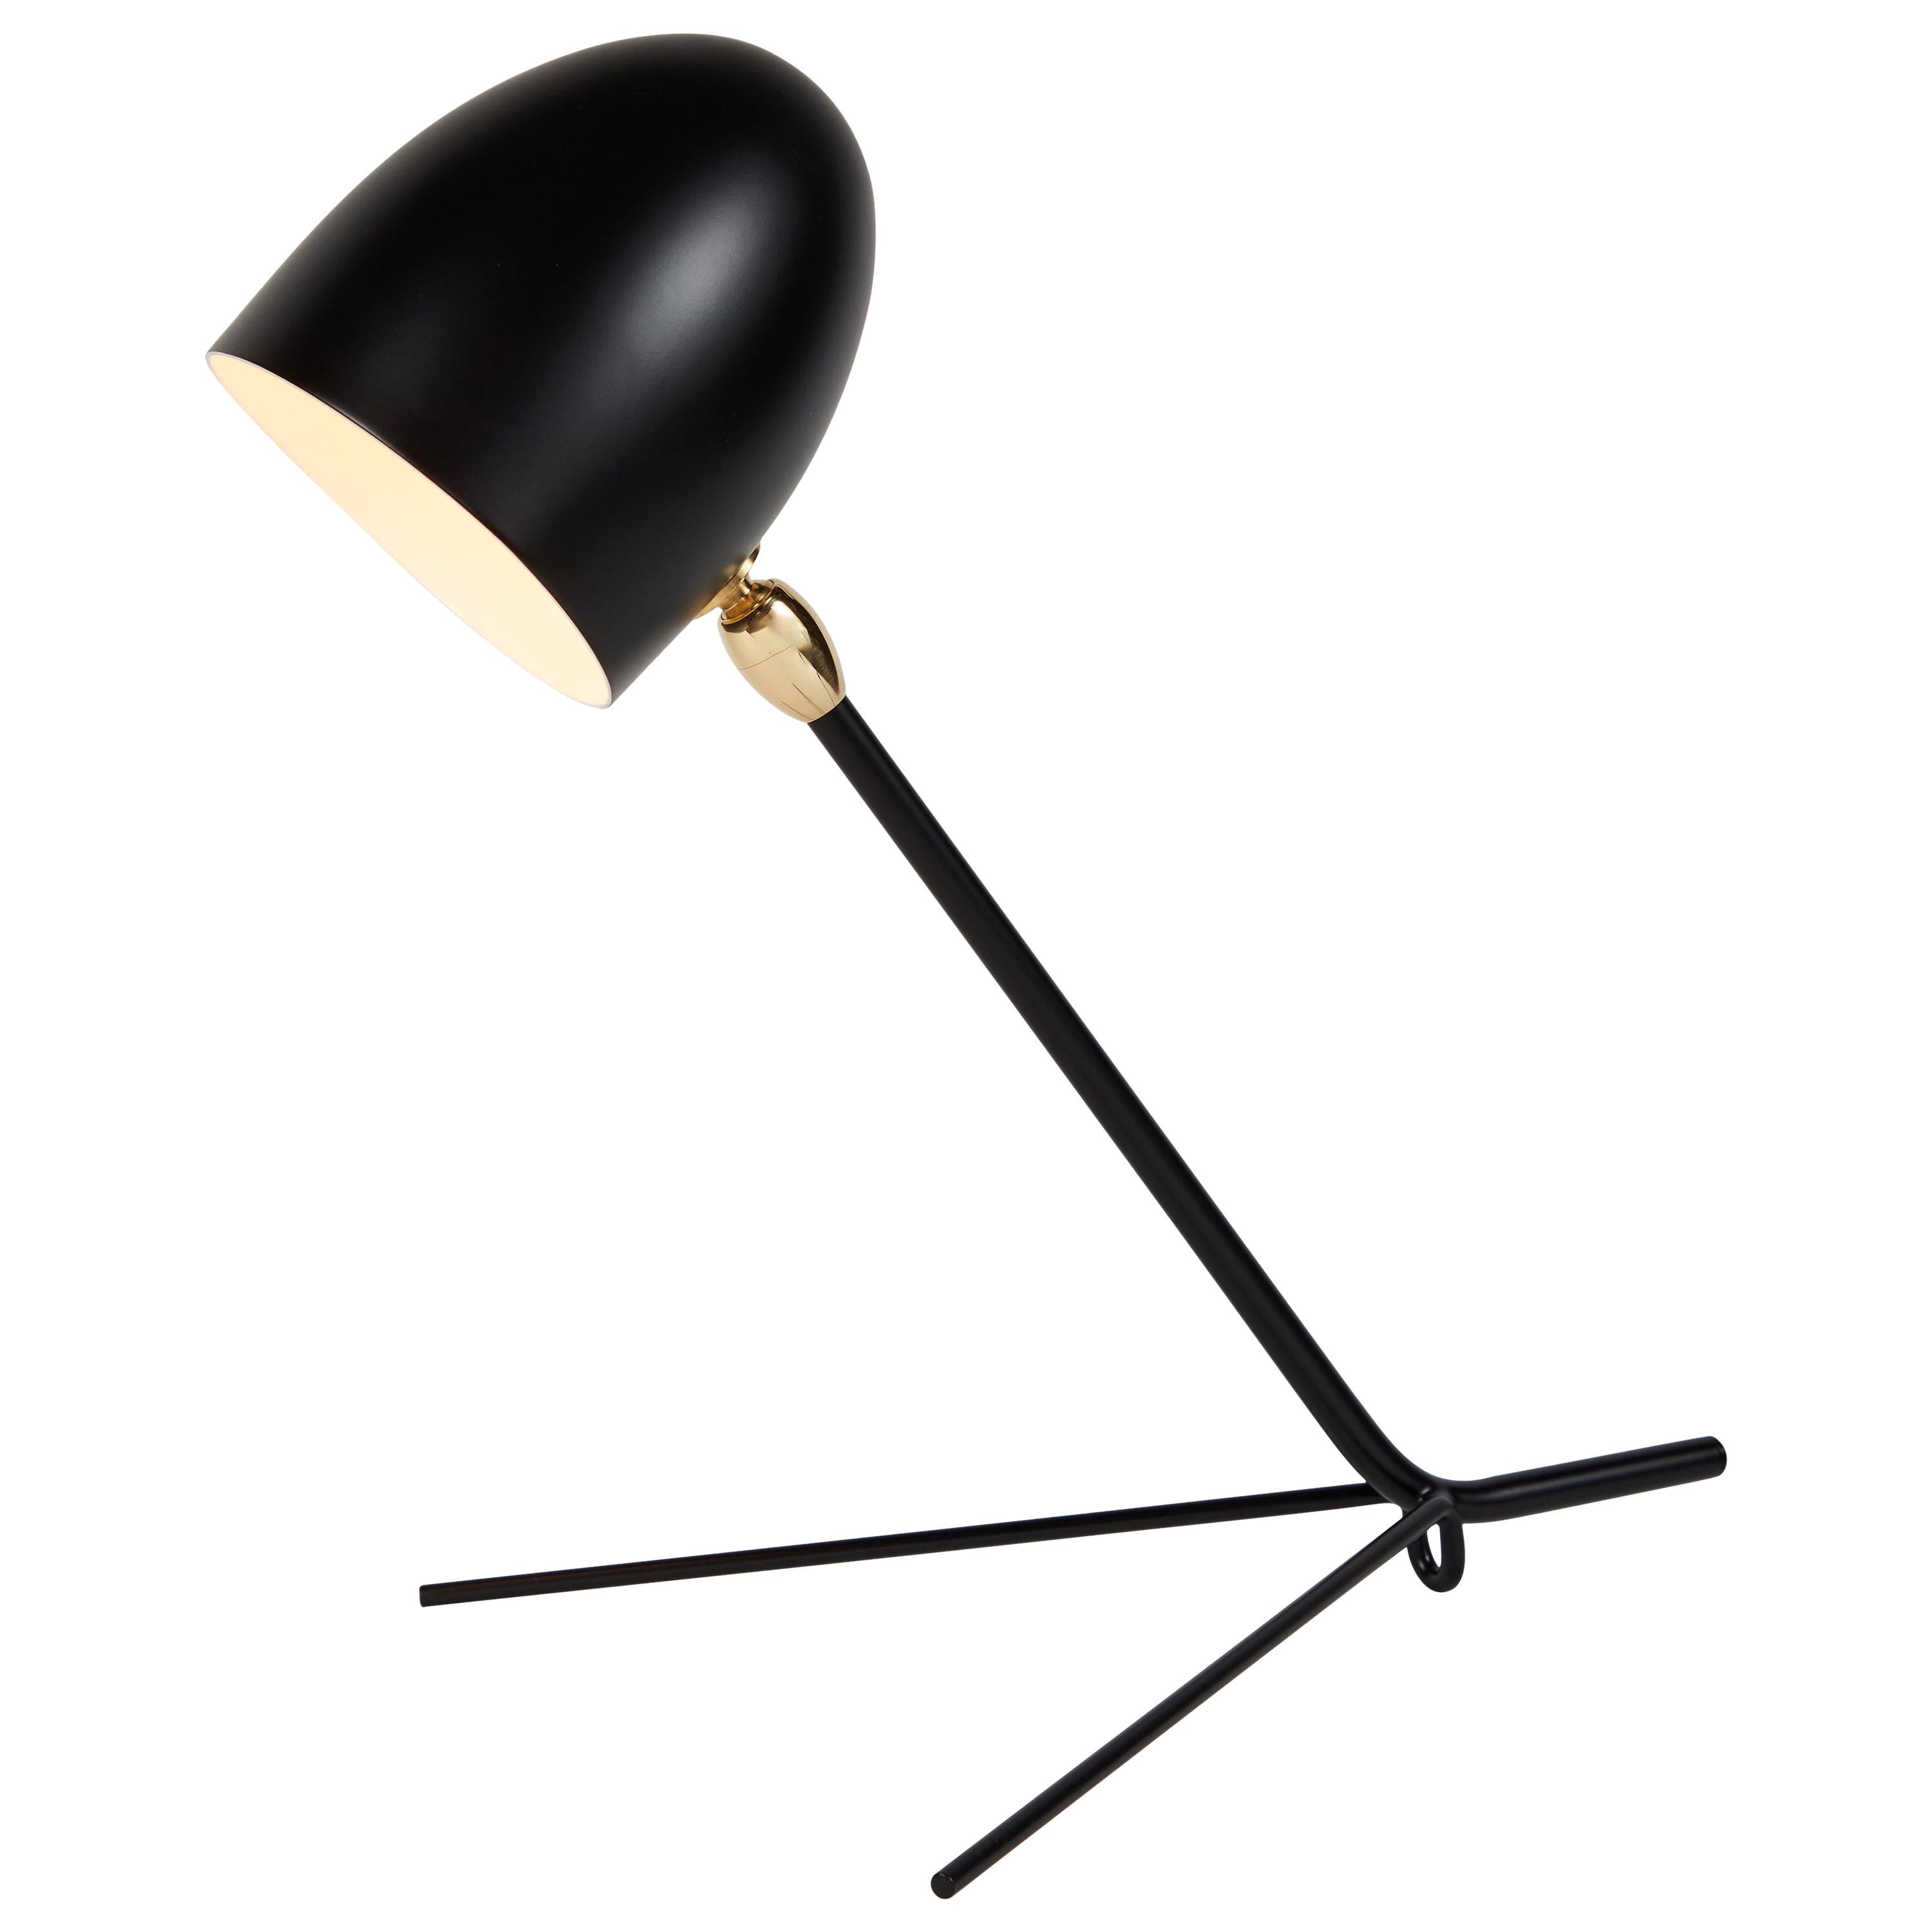 Serge Mouille "Cocotte" Table or Wall Lamp in Black For Sale